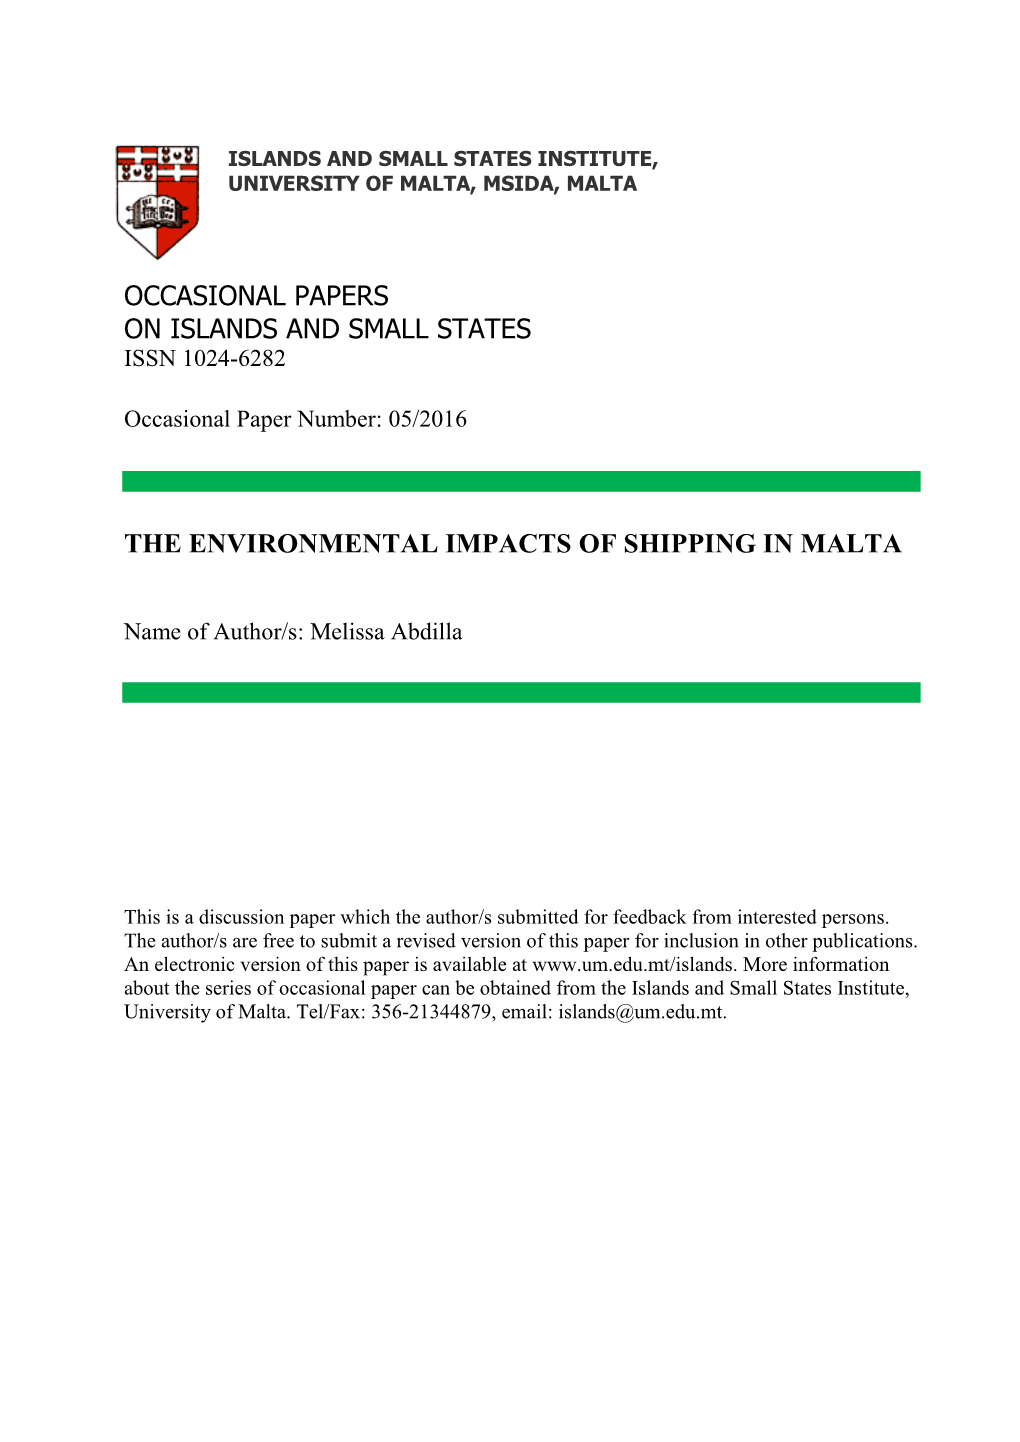 The Environmental Impacts of Shipping in Malta